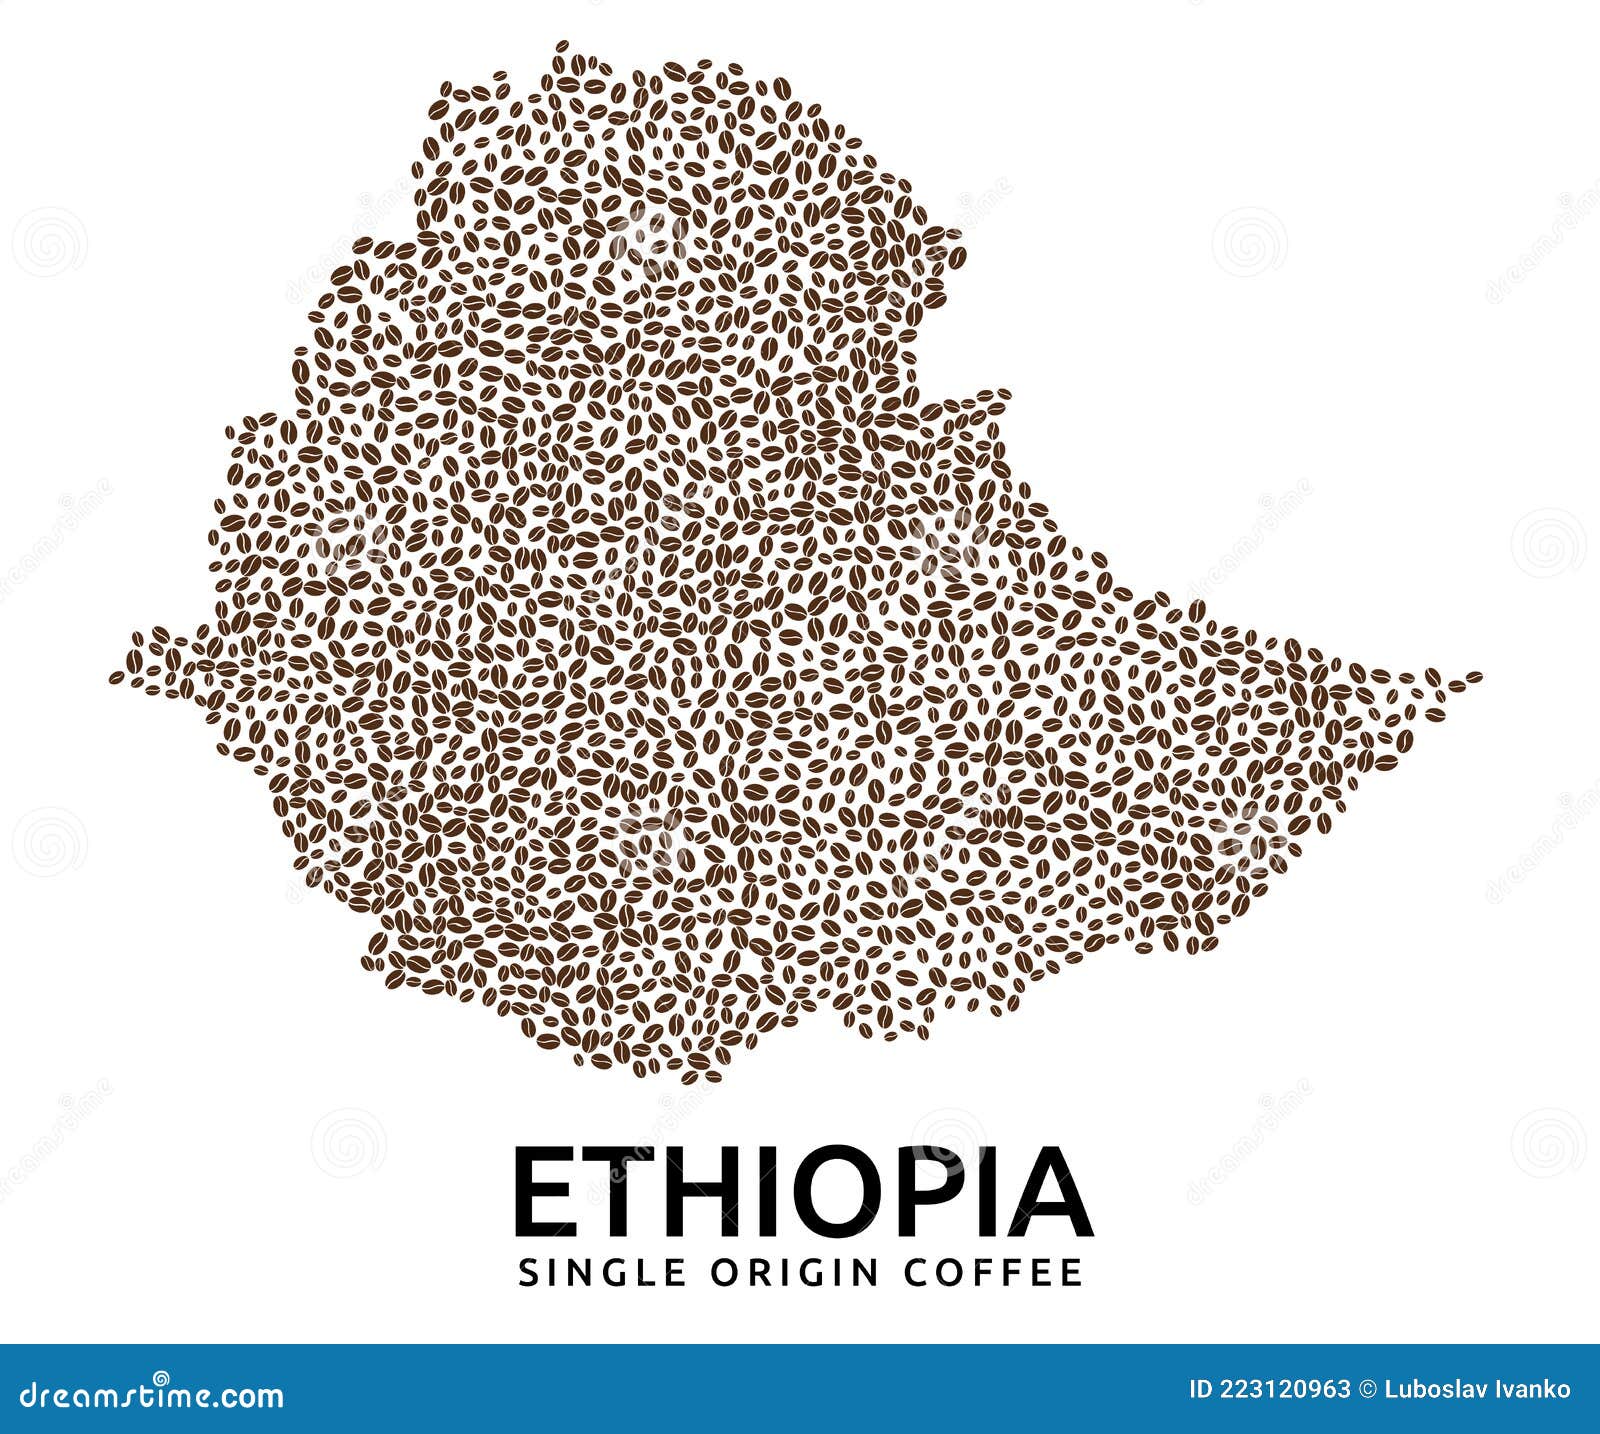 Shape of Ethiopia Map Made of Scattered Coffee Beans, Country Name